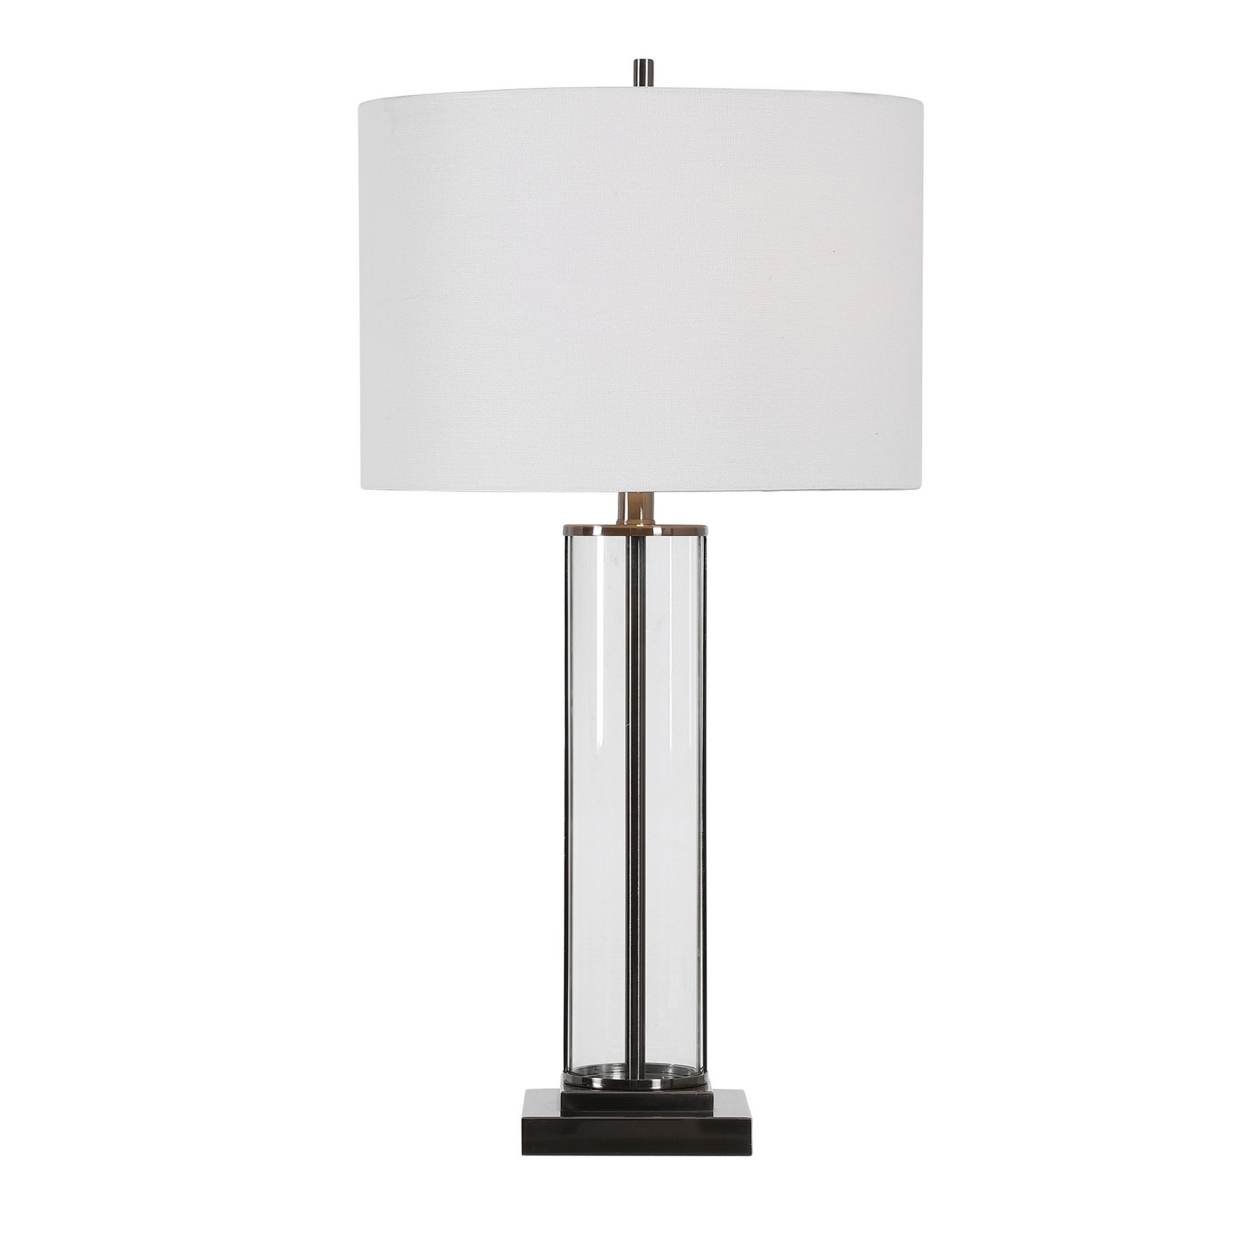 Cylindrical Shape Glass Table Lamp with Metal Trim Accent, Clear- Saltoro Sherpi